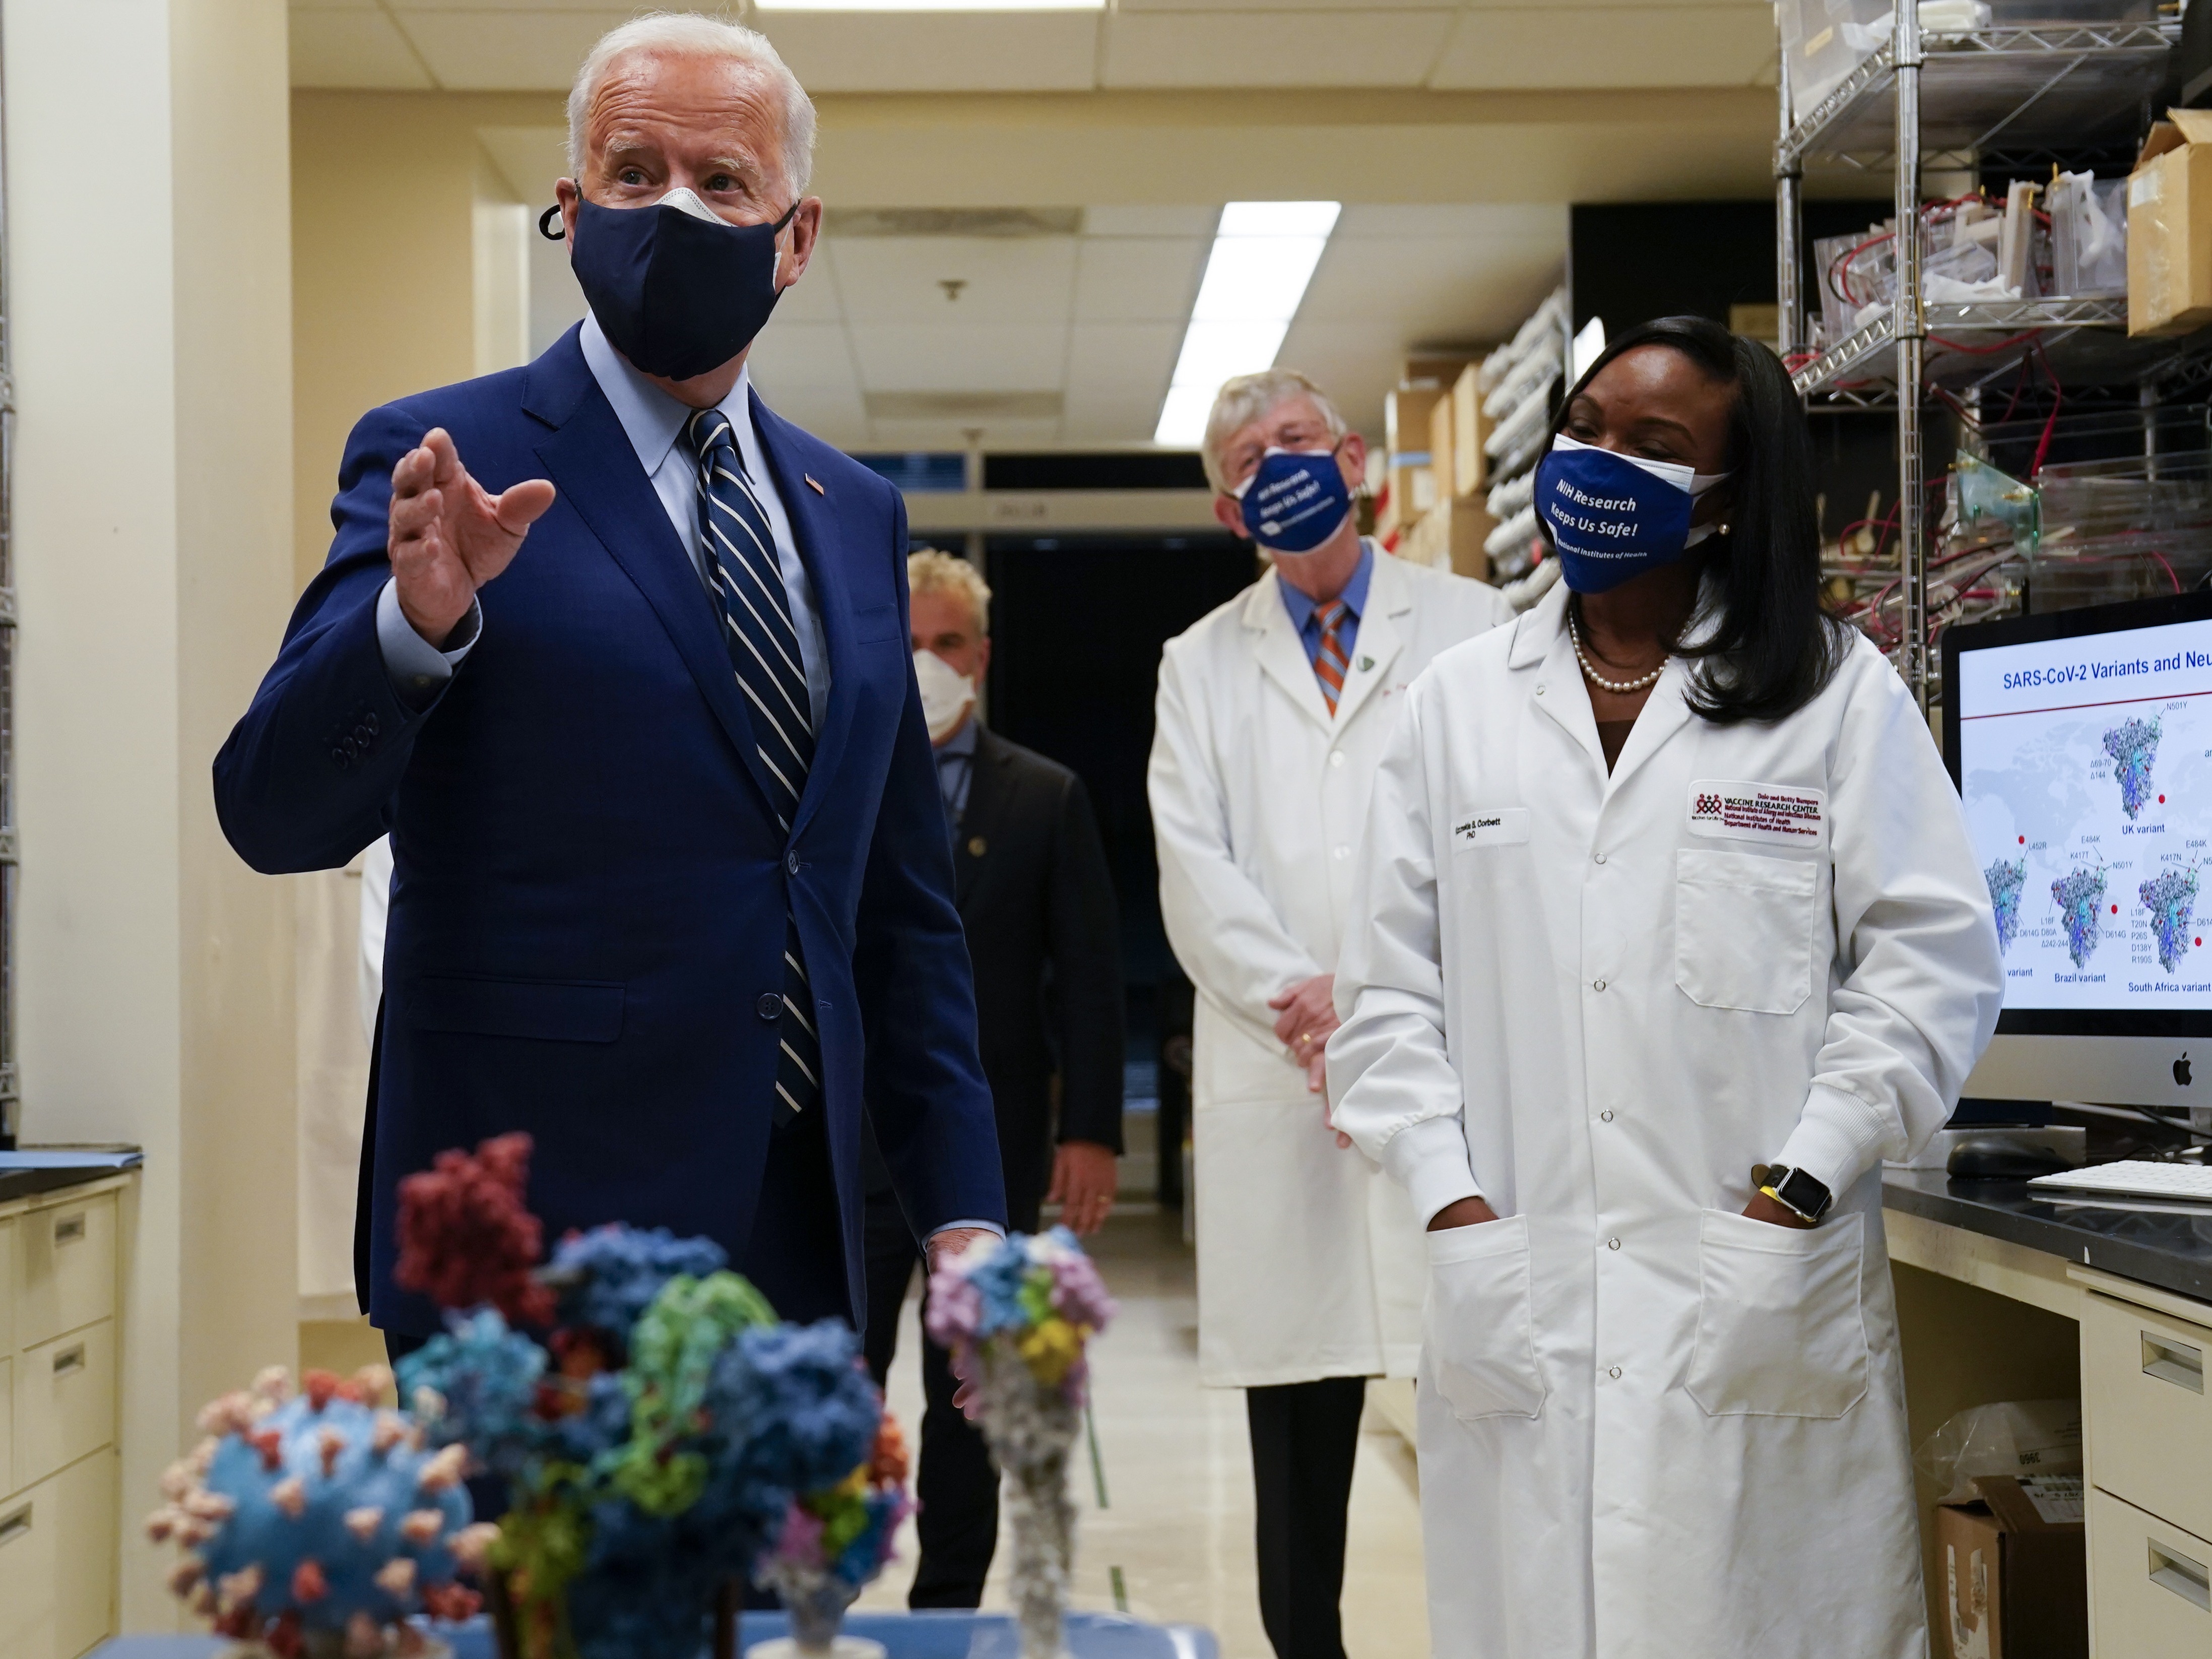 During remarks at the National Institutes of Health, President Joe Biden said his administration has secured enough Covid-19 vaccines to ensure the nation is on track to vaccinate 300 million Americans by mid-July. CREDIT: Evan Vucci/AP